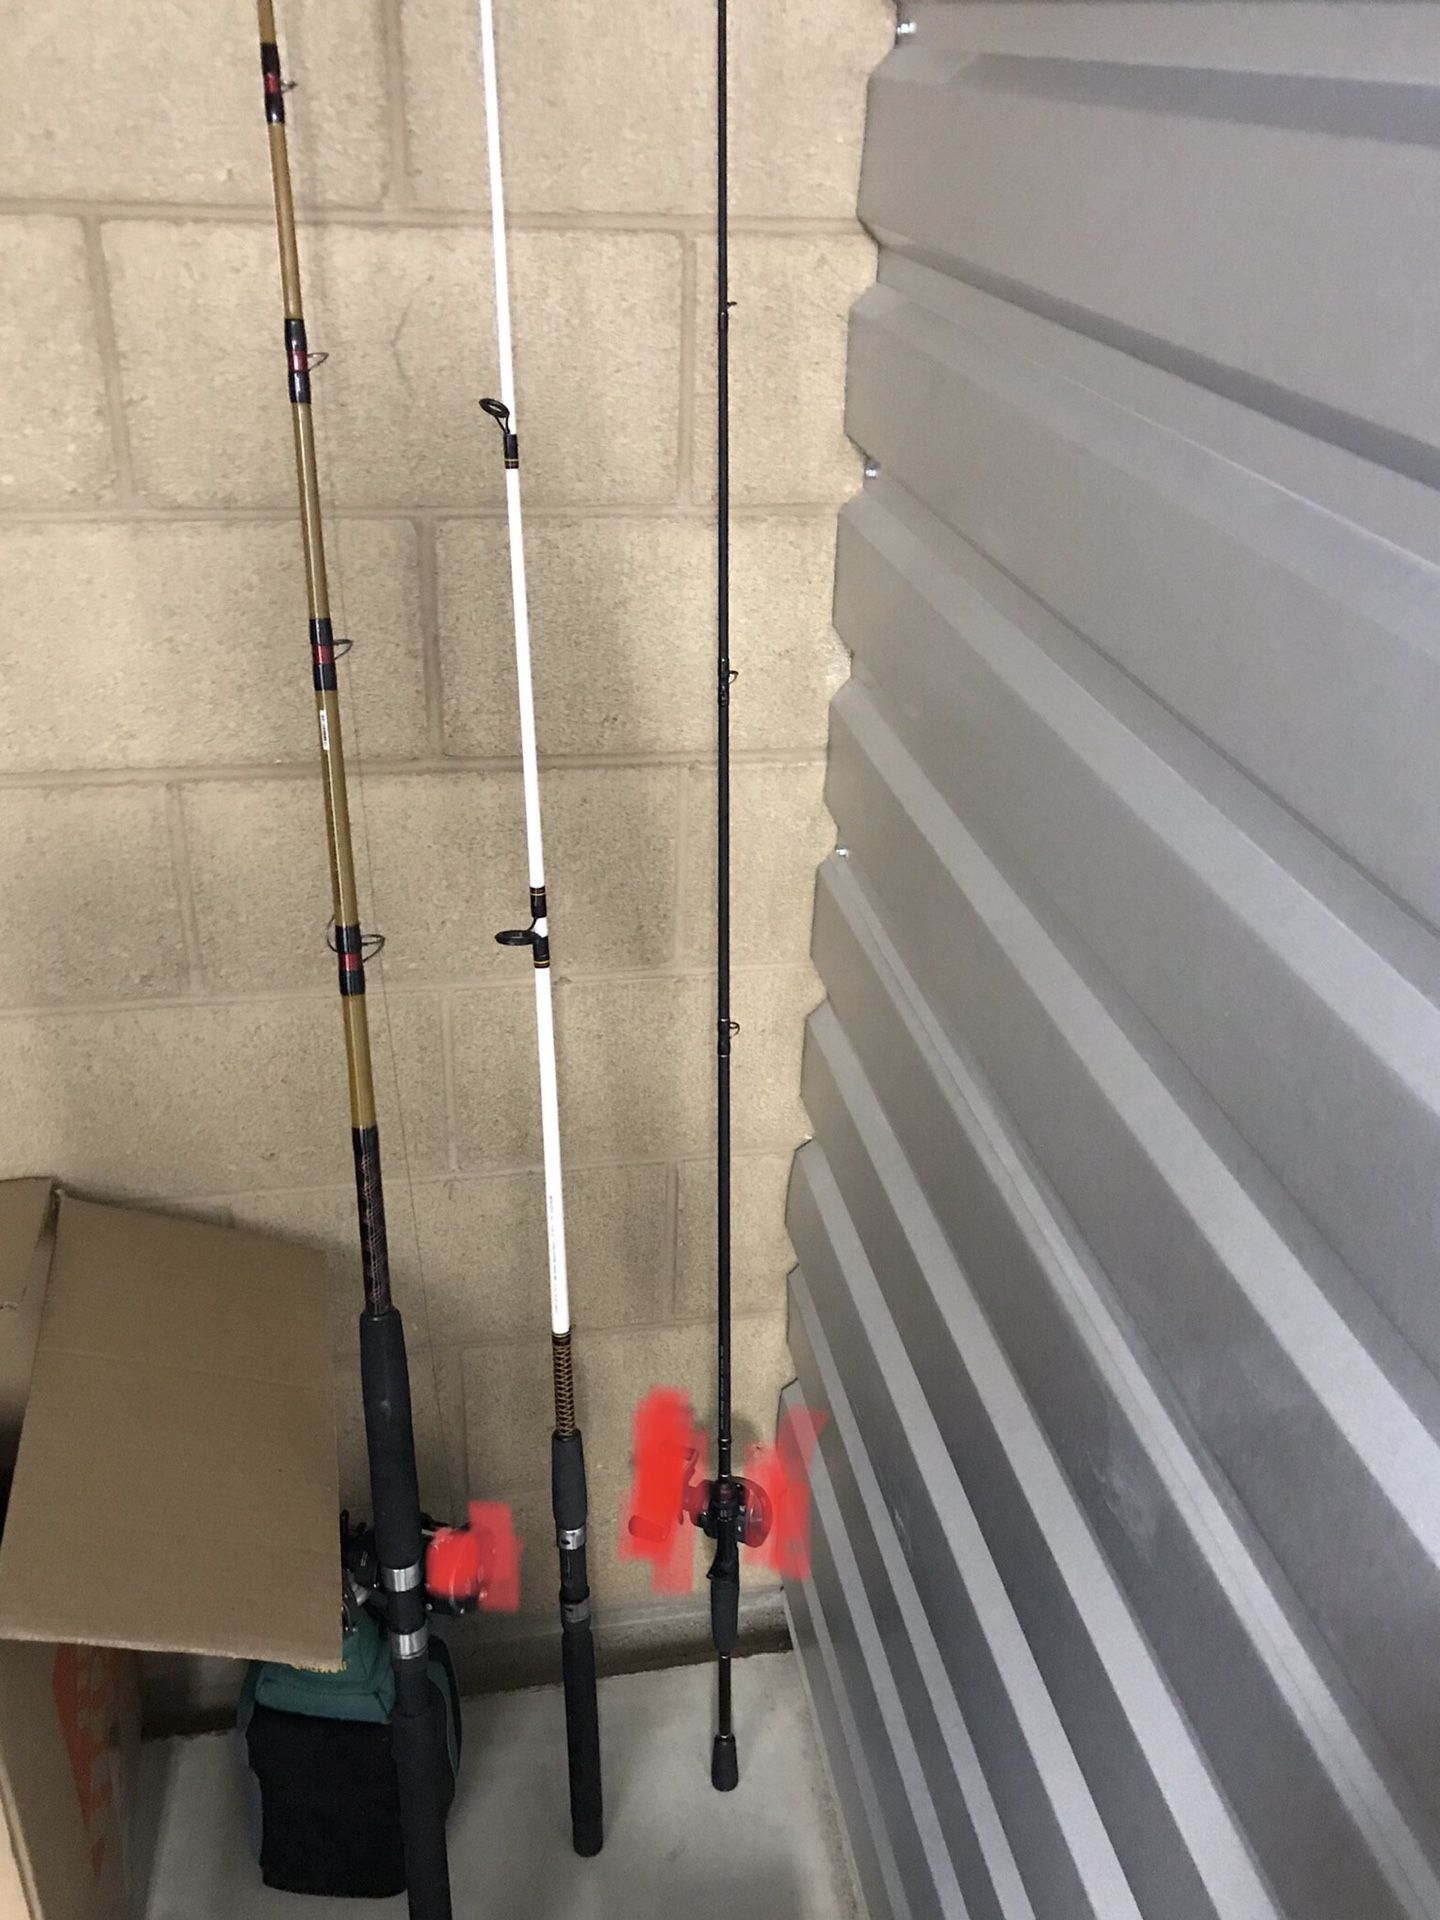 two Ugly stick fishing rods| One Abu fishing rod Three fishing rods for $40 ,No Reel, rods only, one for tuna fishing, two for bass fishing